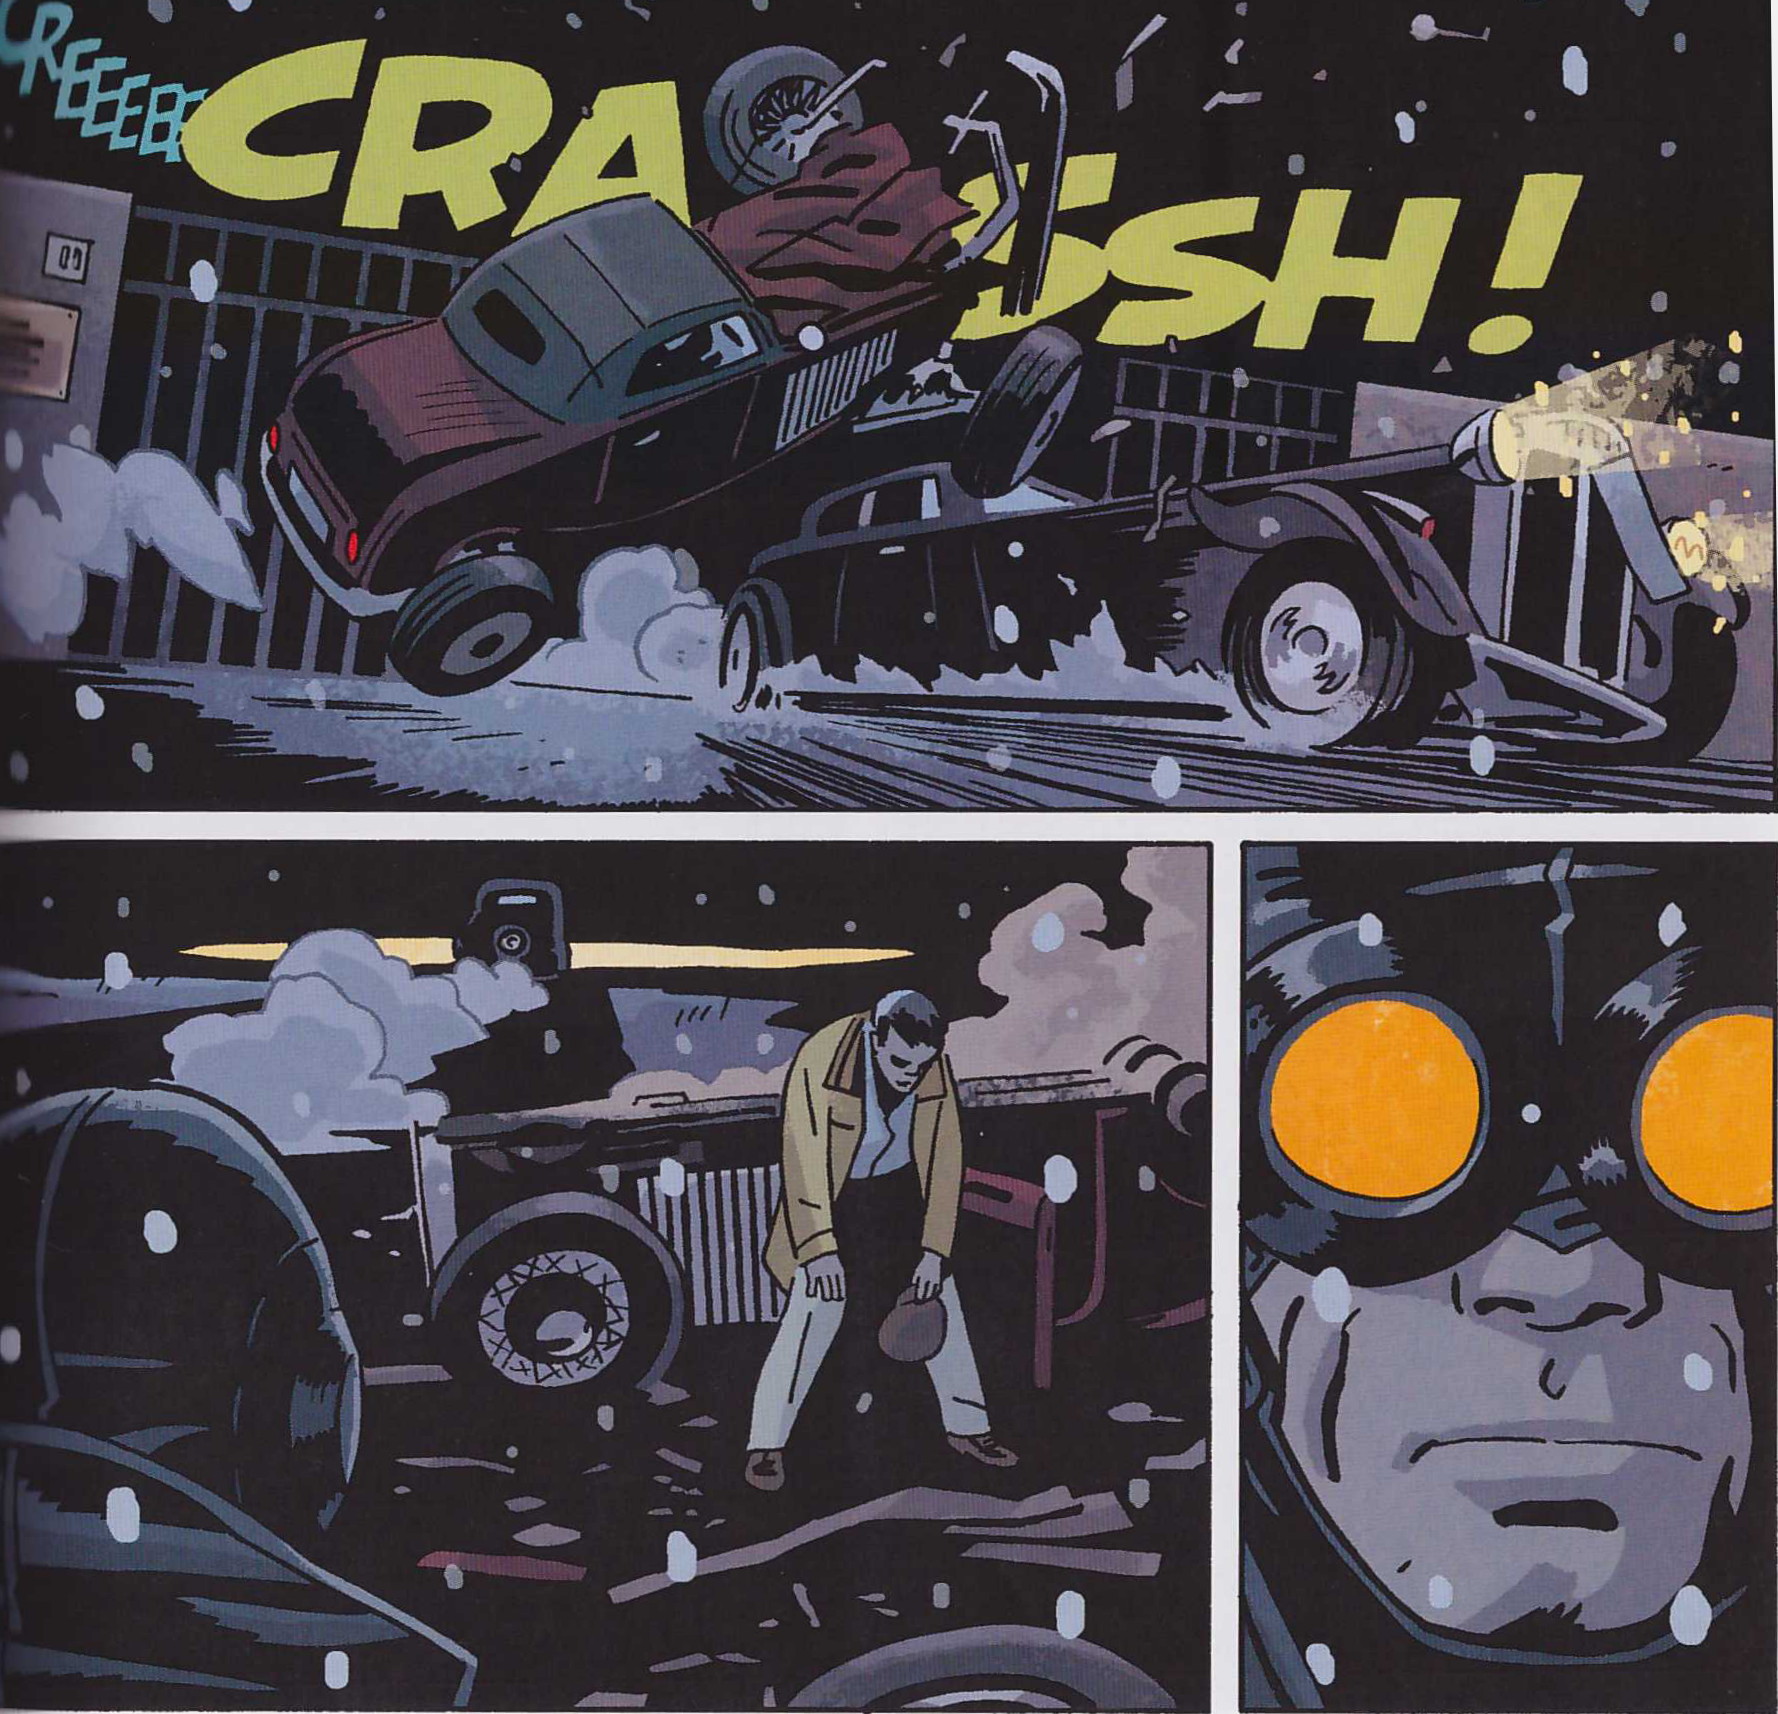 Lobster Johnson The Burning Hand review